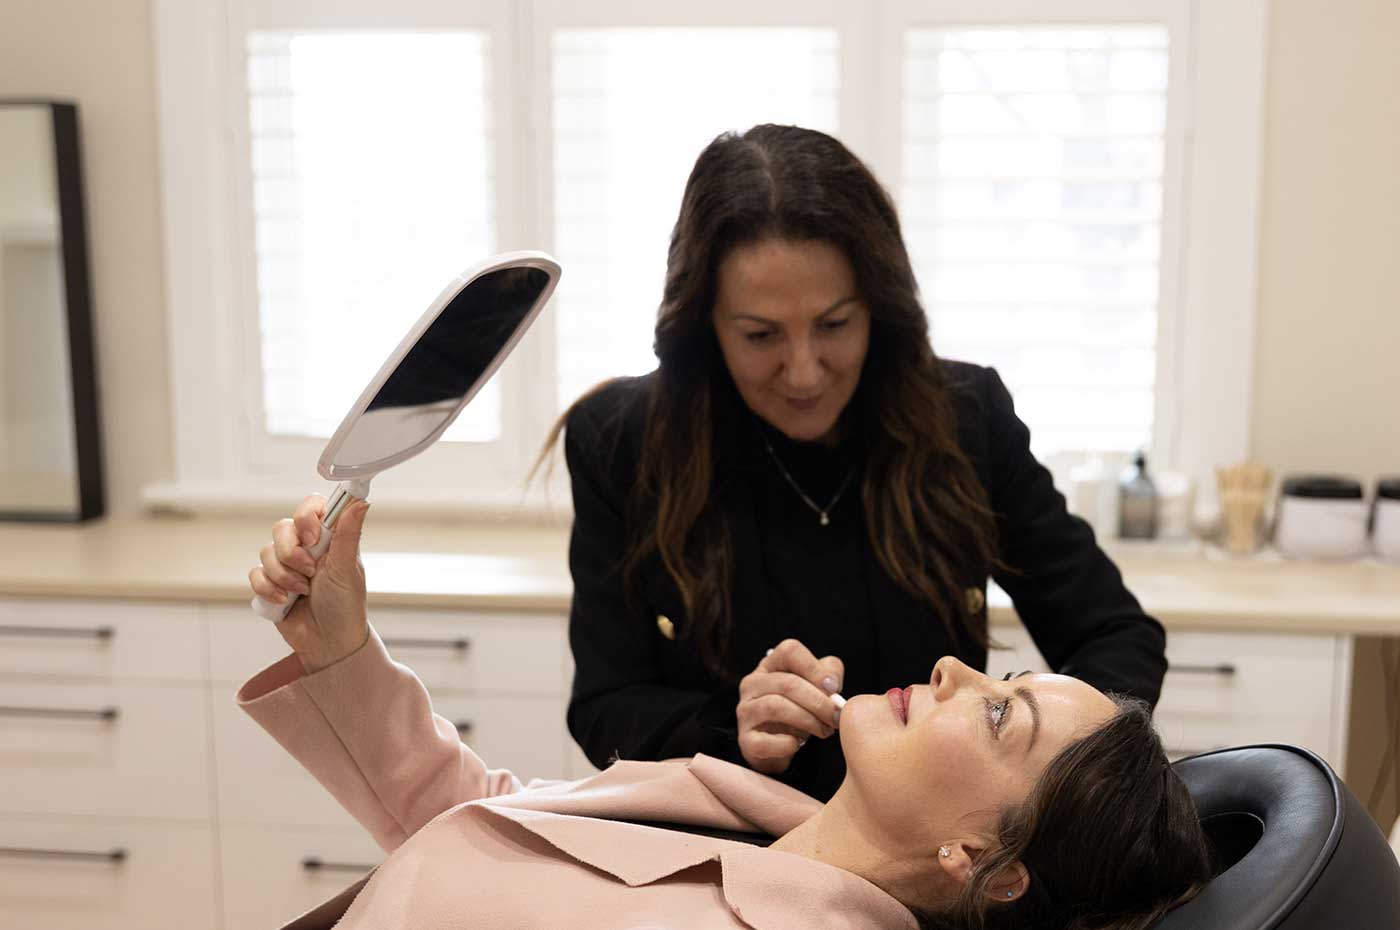 About Face Clinic Michelle Kennedy preparing client for skin treatment